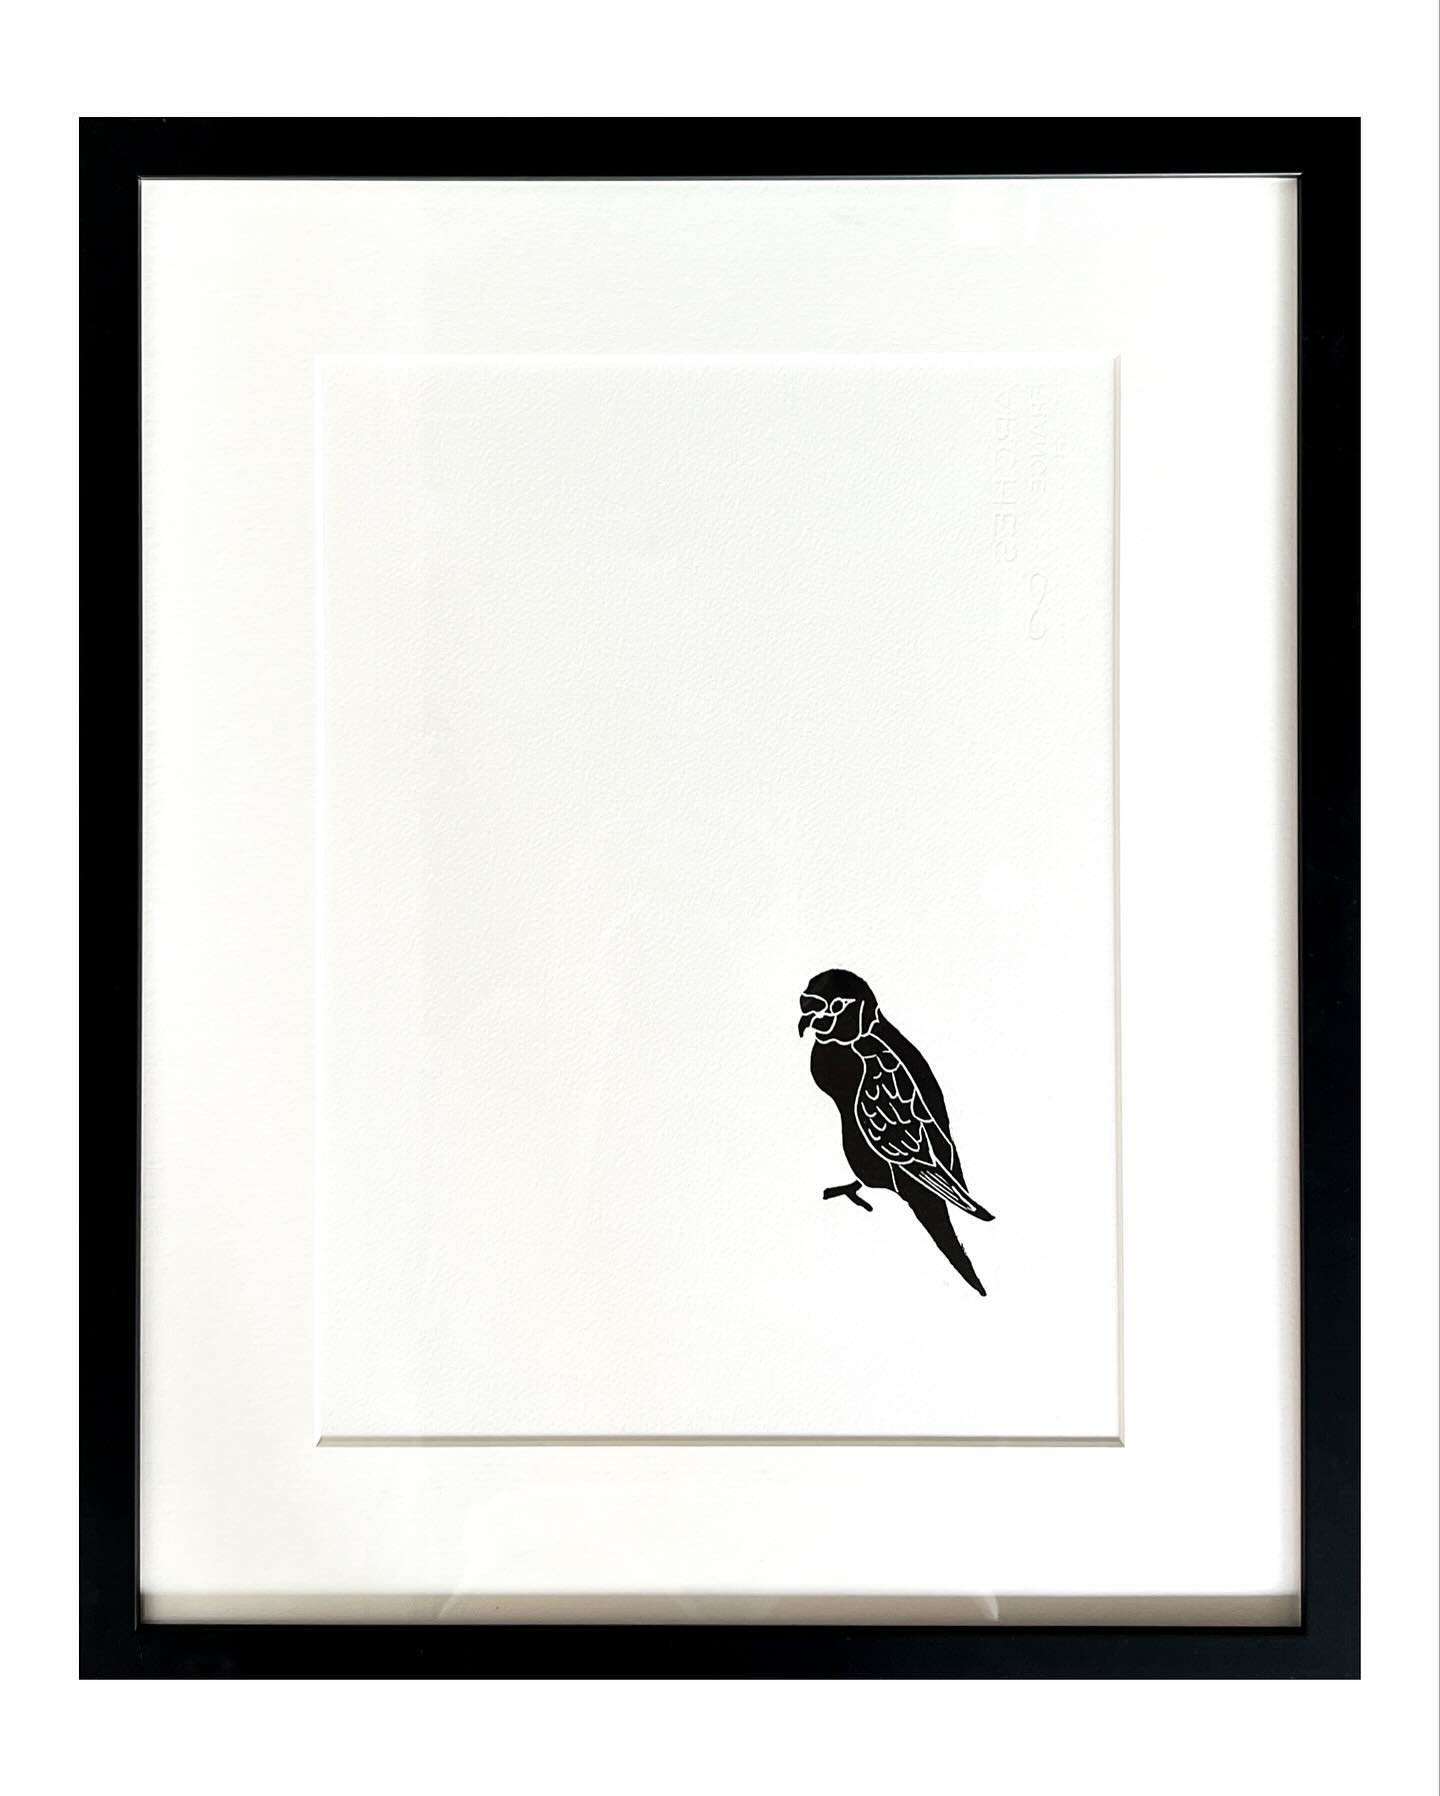 We mustn&rsquo;t forget our precious feathered friends.
Pictured here, Lino cut by the artist loving hand :
.
&lsquo;Little Lorikeet&rsquo; 
&amp;
&lsquo;Glossy Black Cockatoo&rsquo;
.
LIBBY MOORE
Please Stay - a story of endangered species.
Limited 